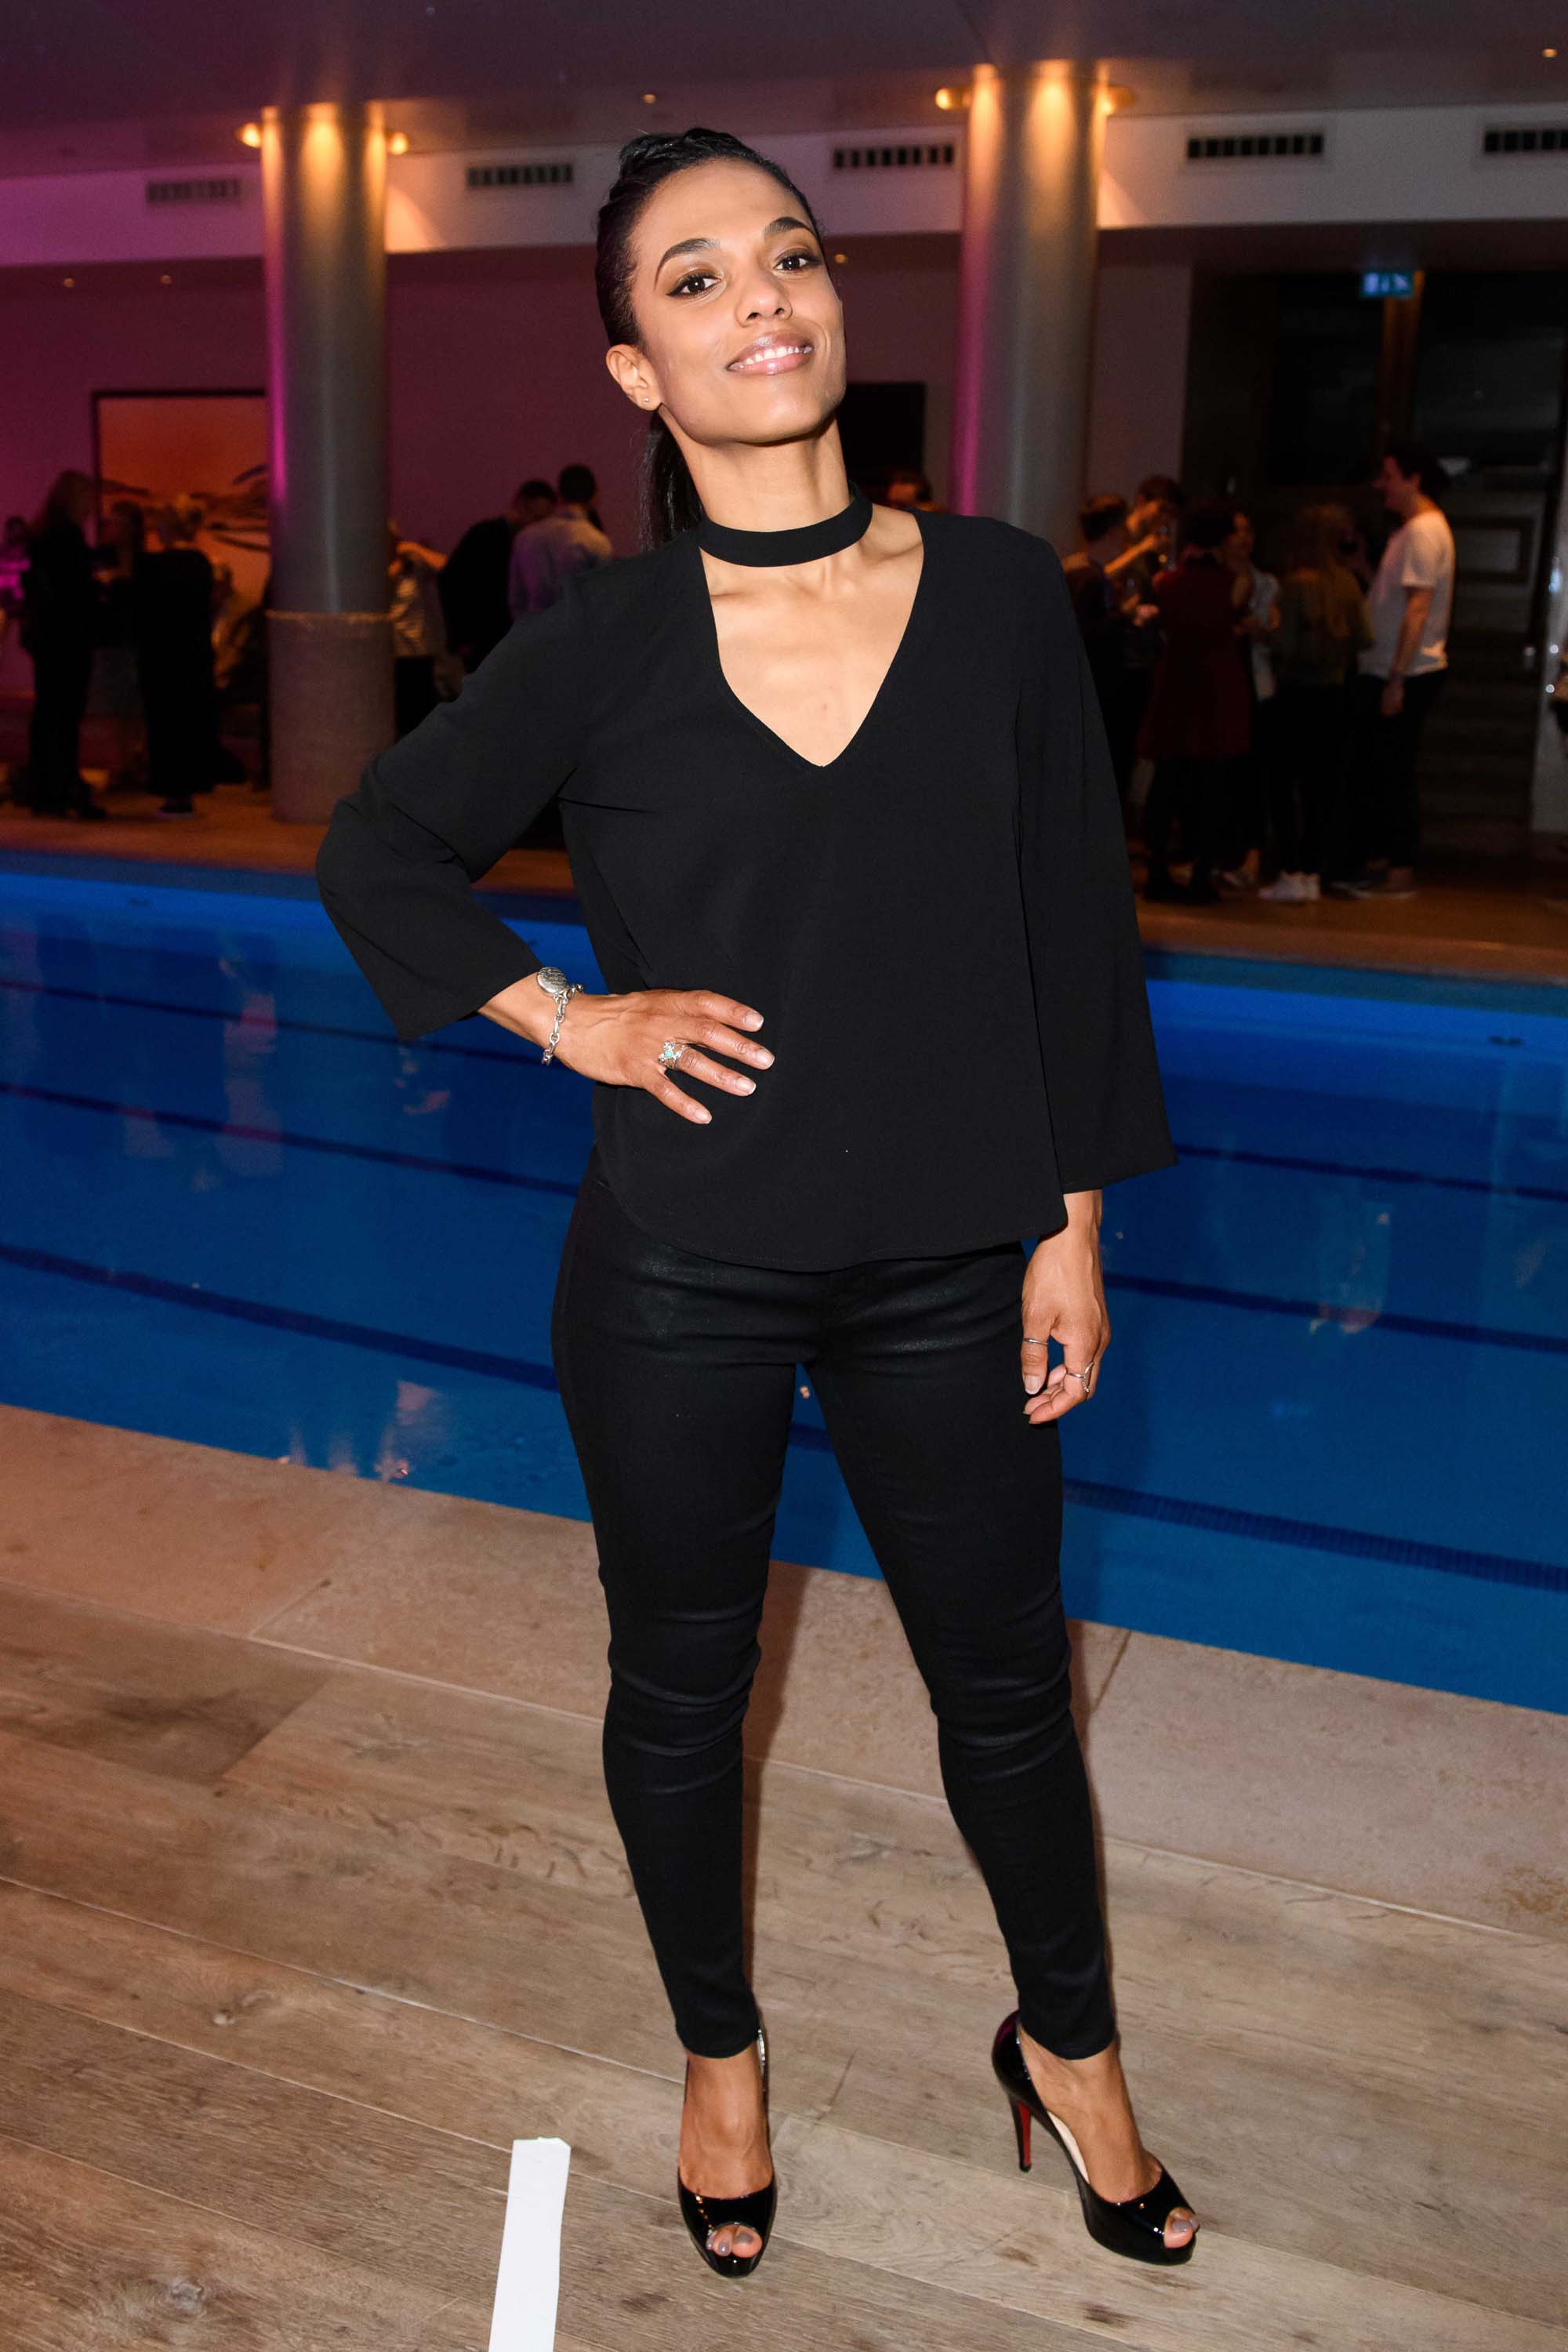 Freema Agyeman seen at the Apologia play after party